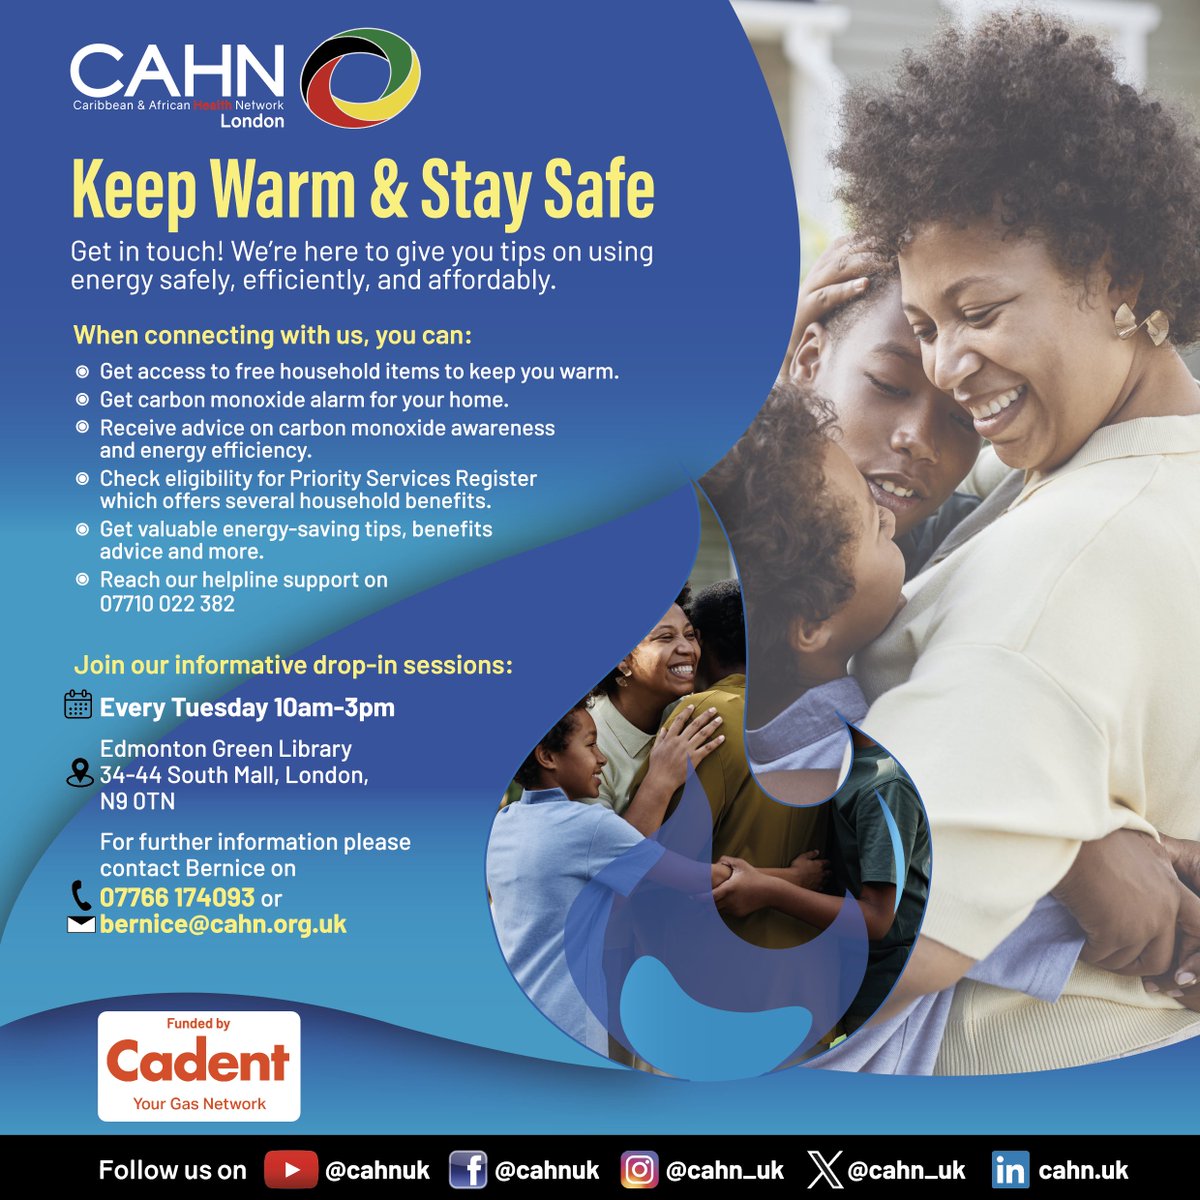 Keep Warm & Stay Safe! Access free household items, learn to recognise carbon monoxide signs, enjoy drop in-sessions and more. In MCR, reach out to Michelle at 07789975205 and in LDN, connect with Bernice at 07766174093. Email ribc@cahn.org.uk. @CadentGasLtd #CAD24